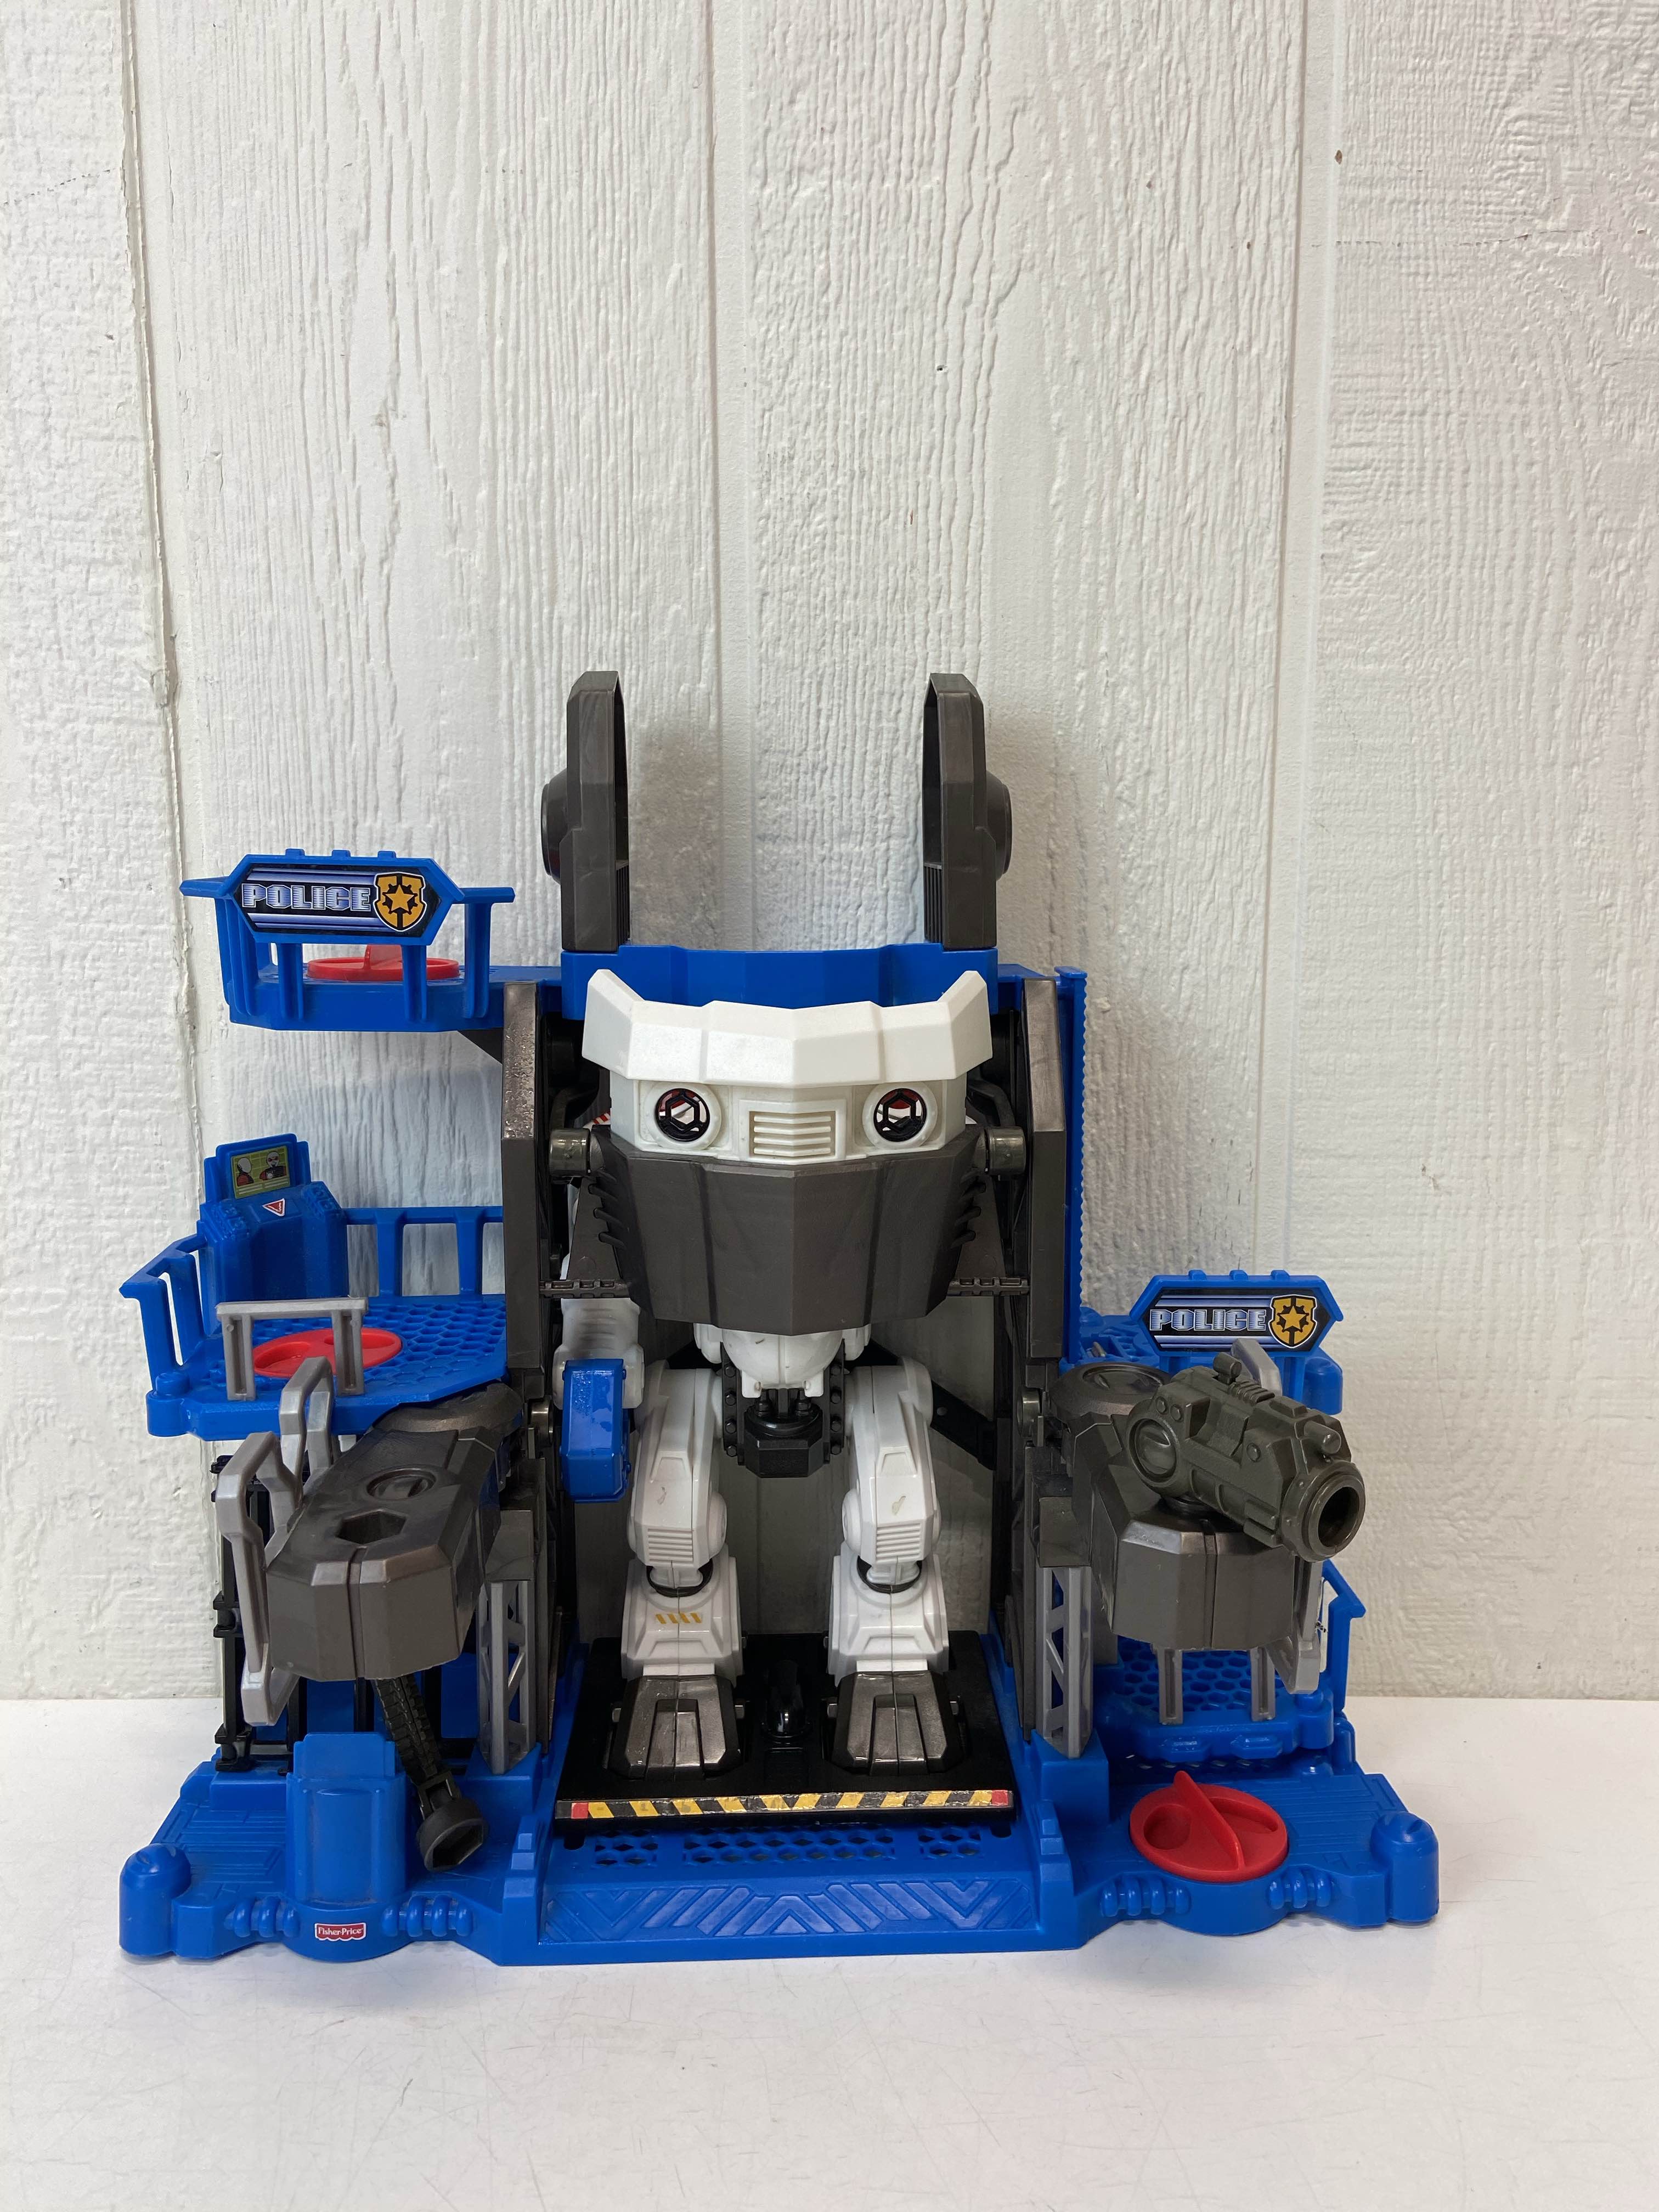 Fisher Price Imaginext Robot Police Headquarters